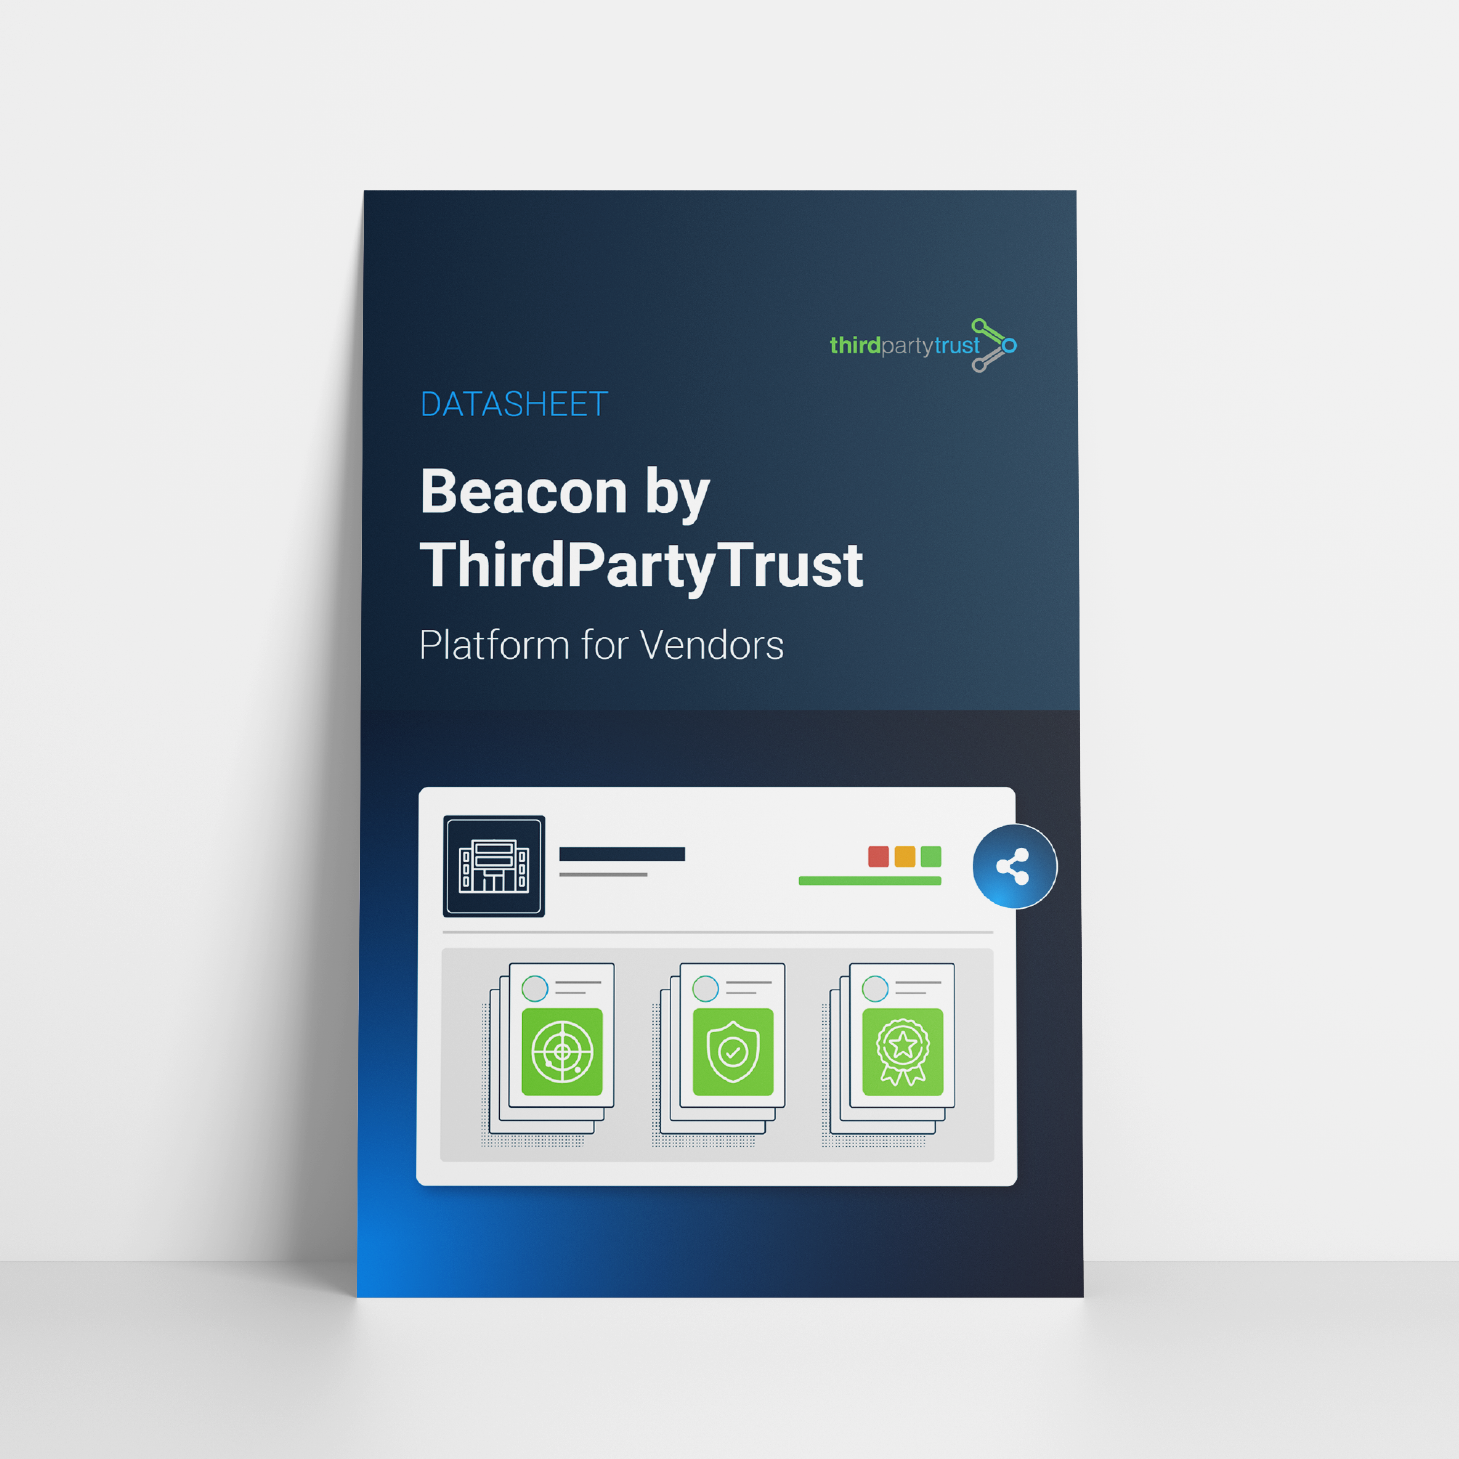 Product Datasheet: Beacon by ThirdPartyTrust